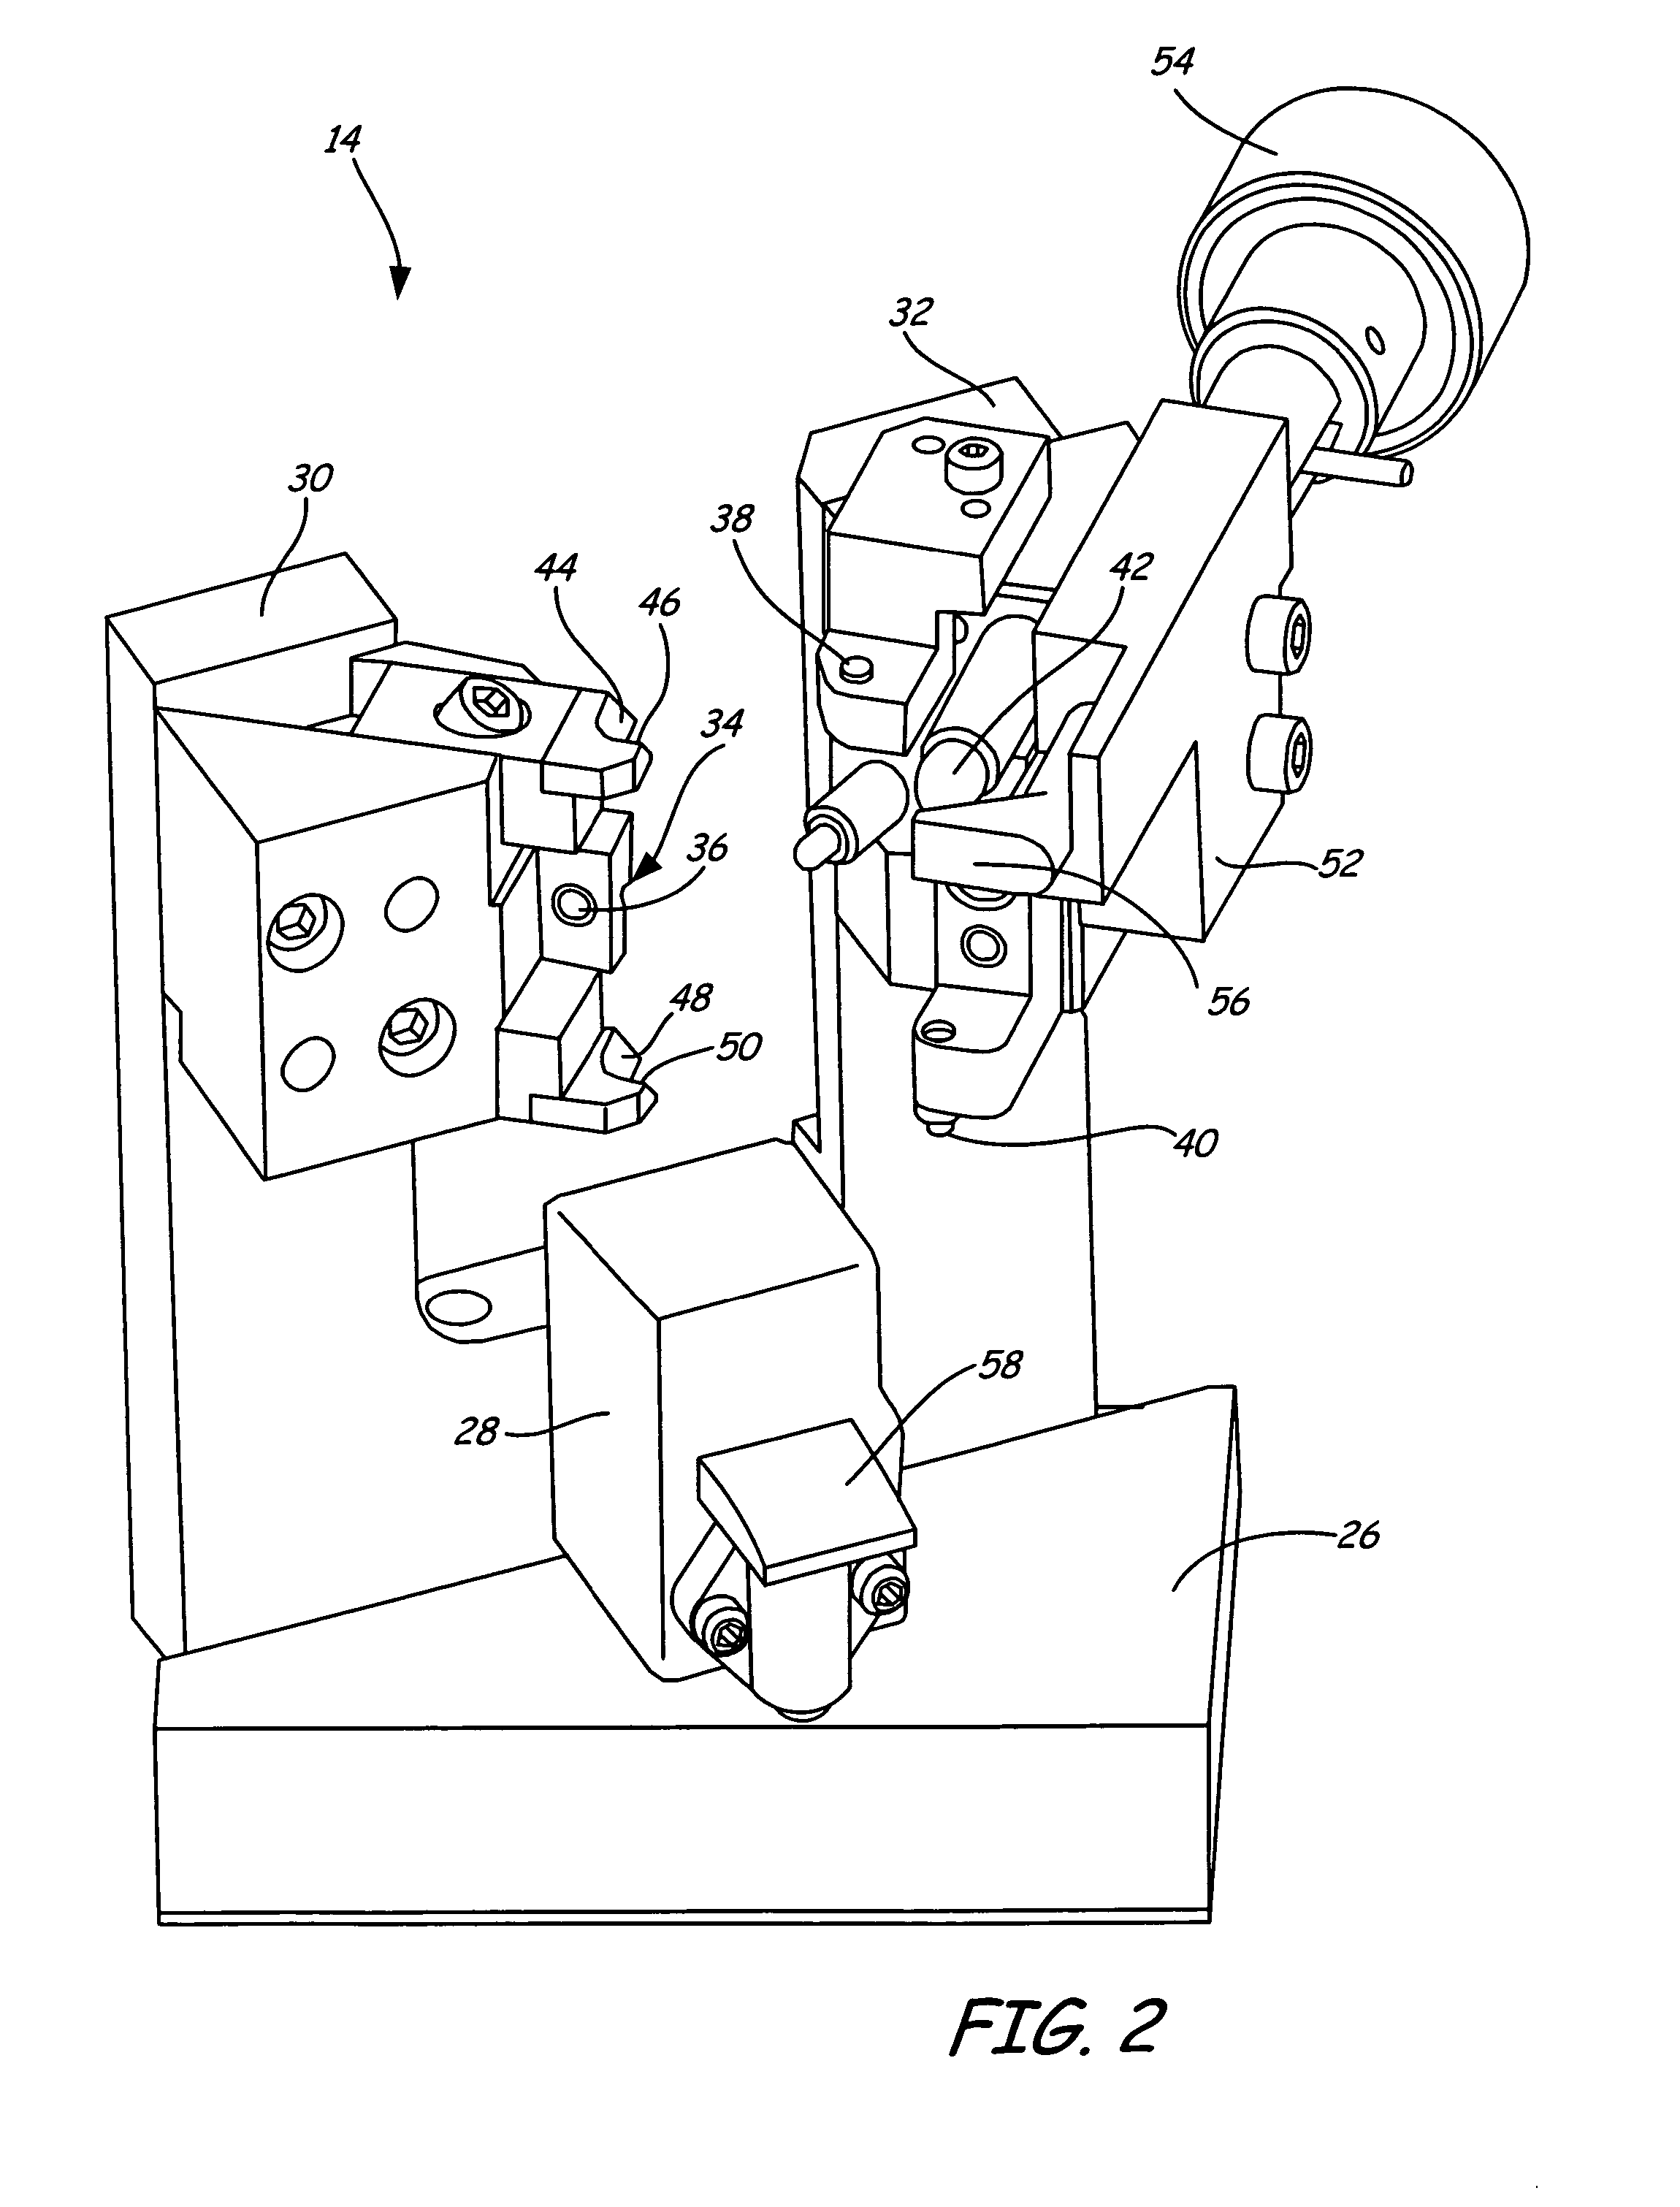 System and method for inspection of hole location on turbine airfoils